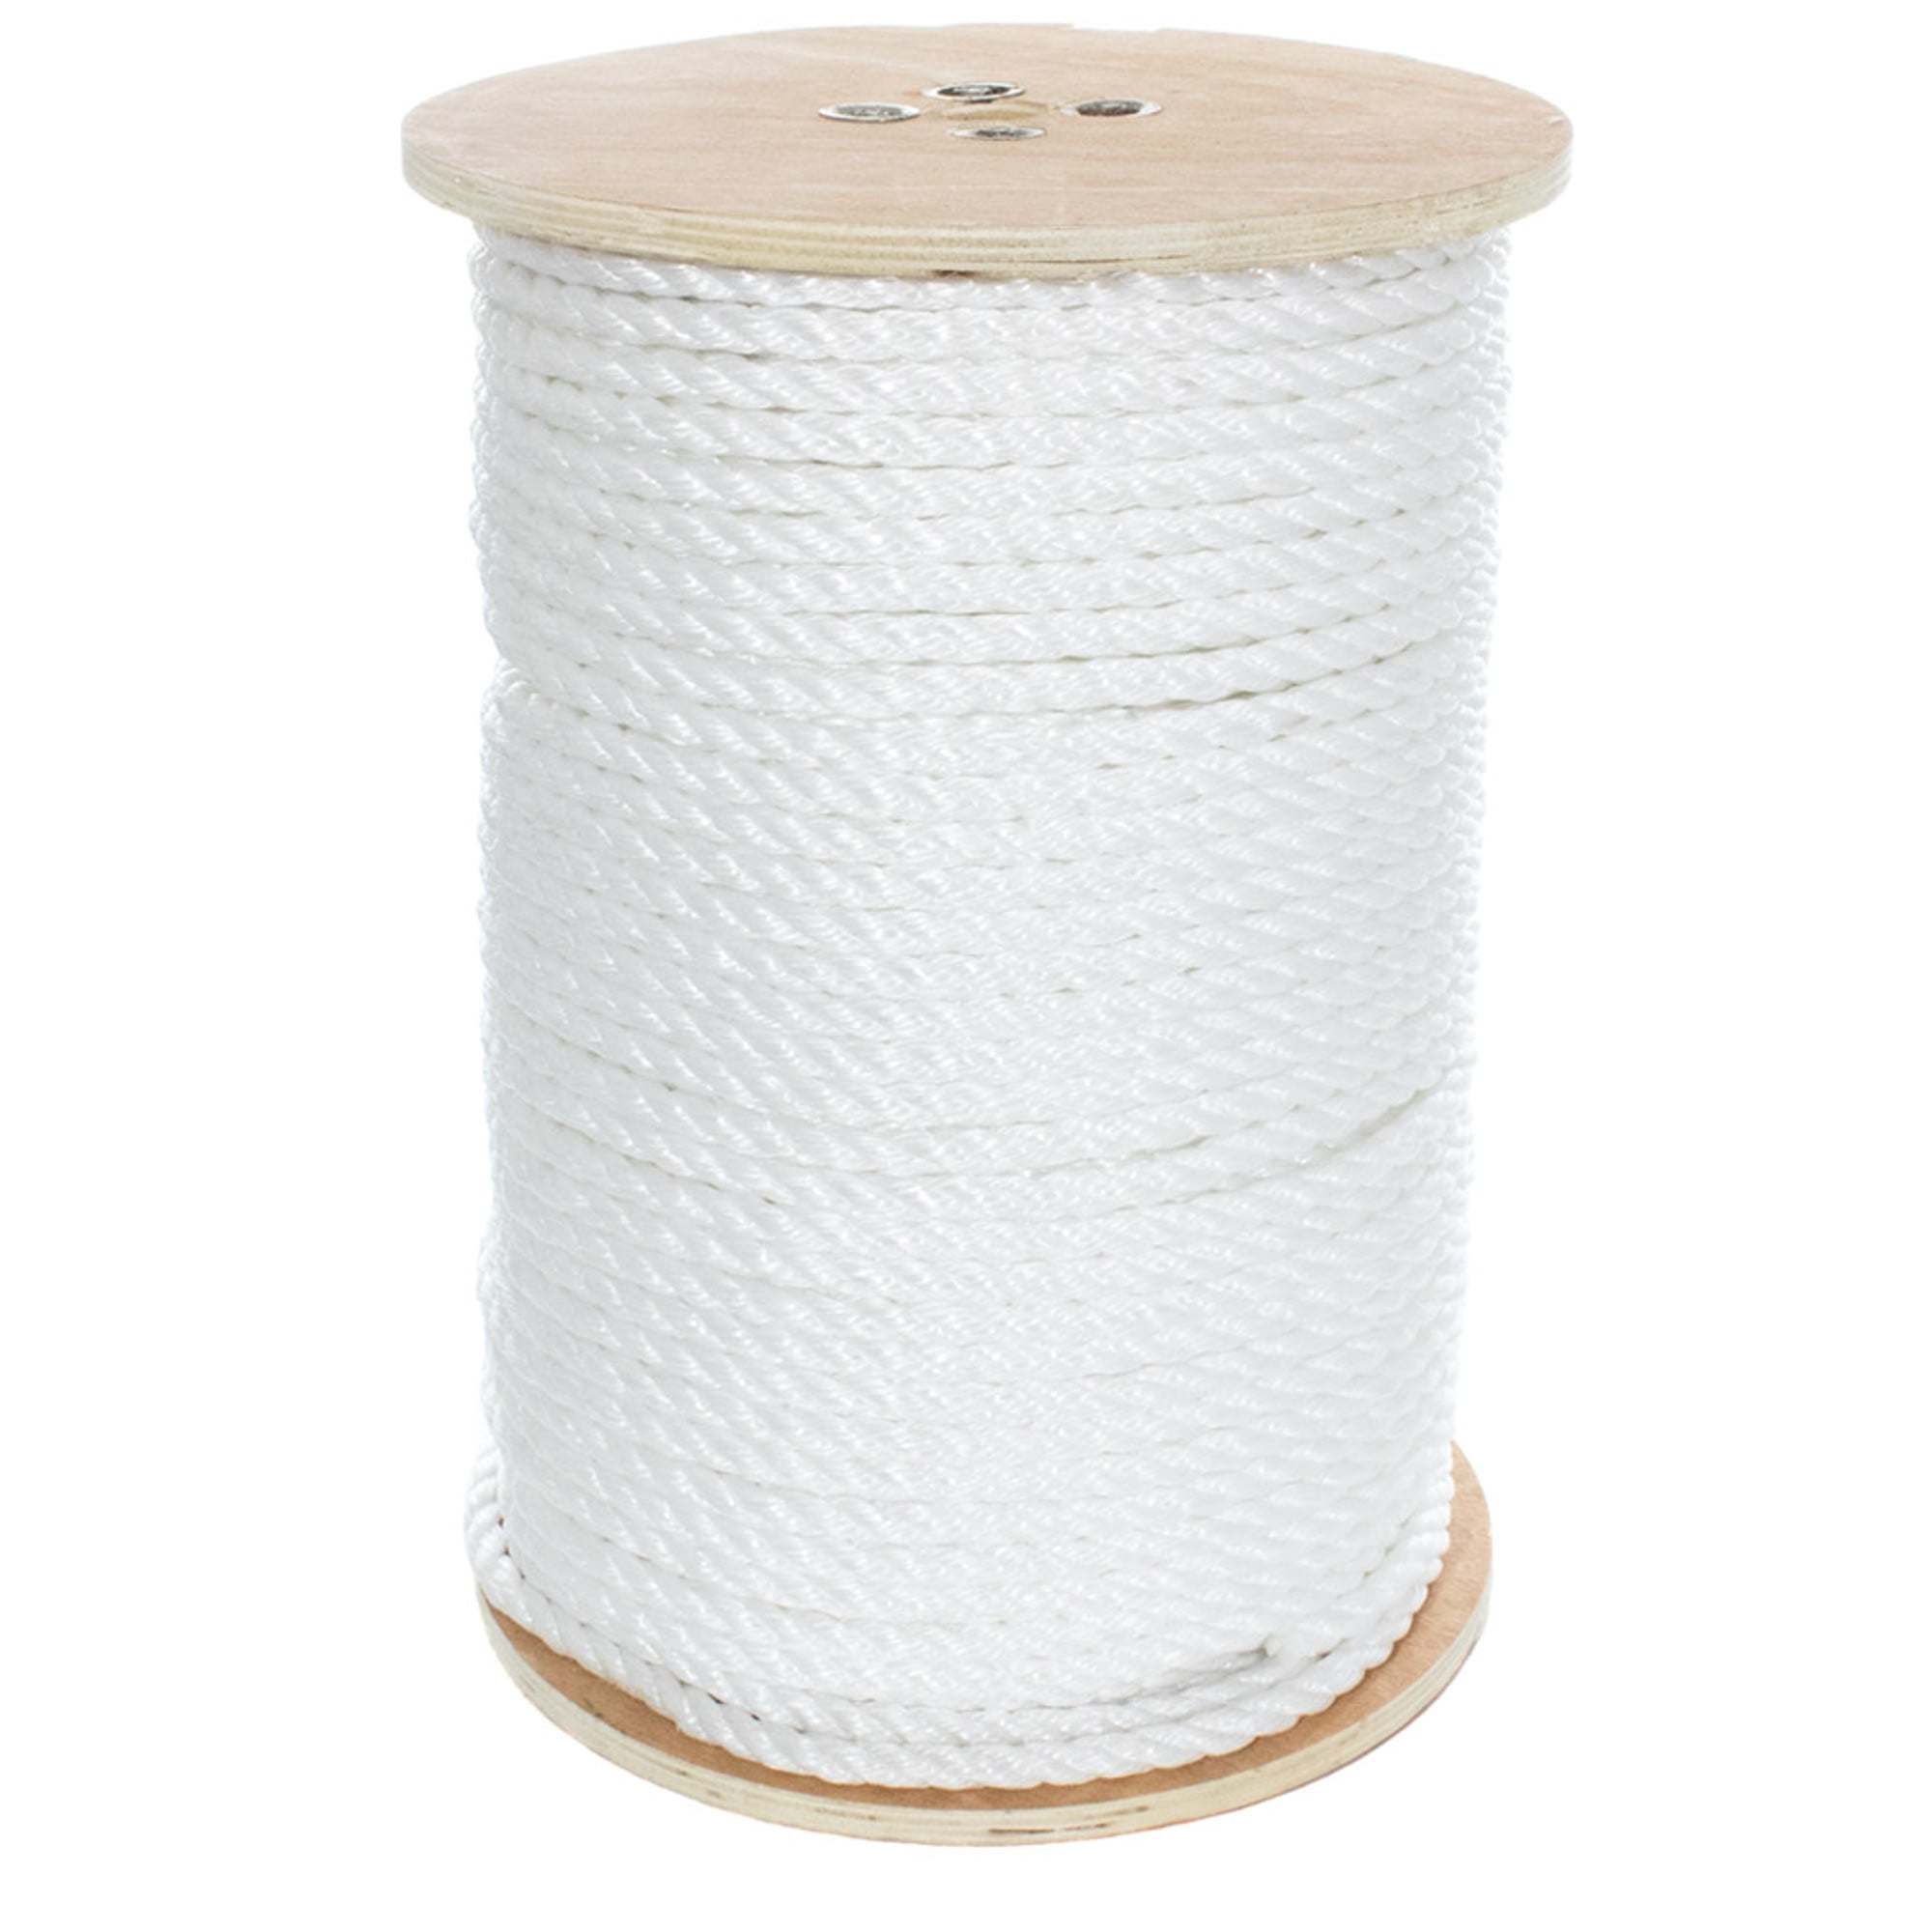 5/8" 3/4" in White 3/8" 5/16" GOLBERG Twisted Polypropylene Rope 1/4" 1/2"